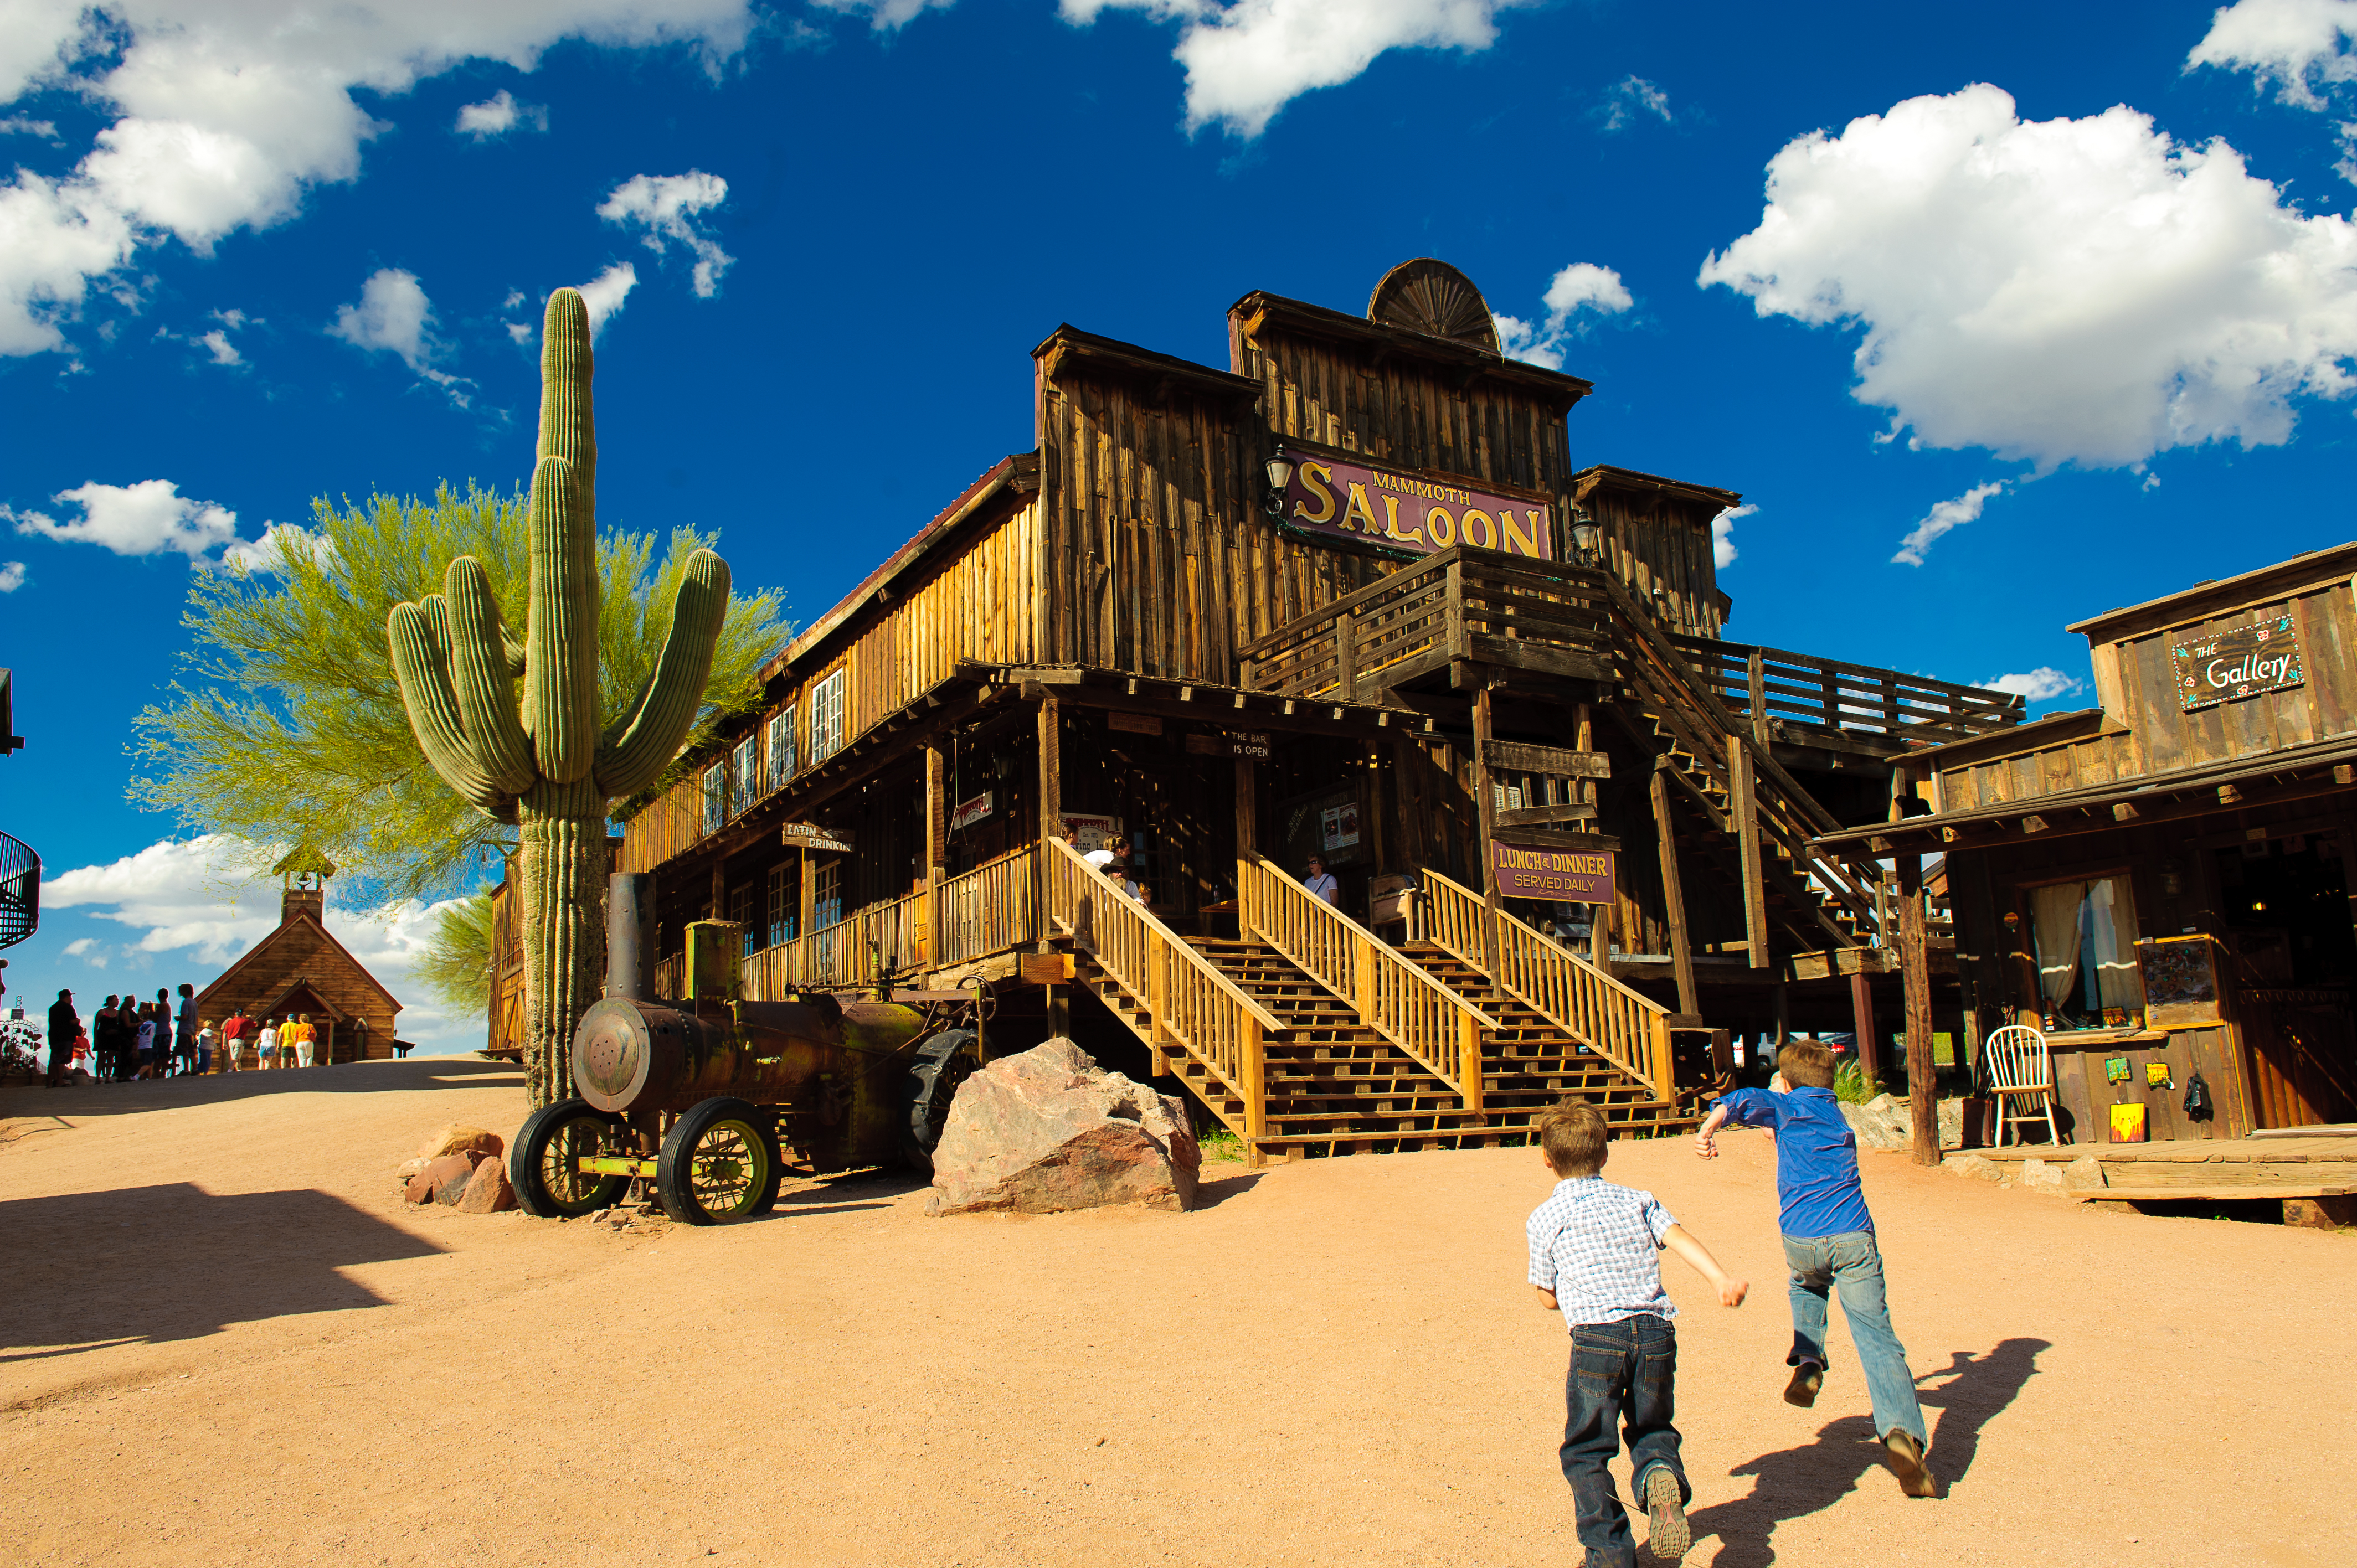 https://assets.simpleviewinc.com/simpleview/image/upload/crm/chandler/Kids-at-Goldfield-Ghost-Town-5d4d4d4e5056a36_5d4d55bb-5056-a36a-0bc7ac61500c9069.jpg